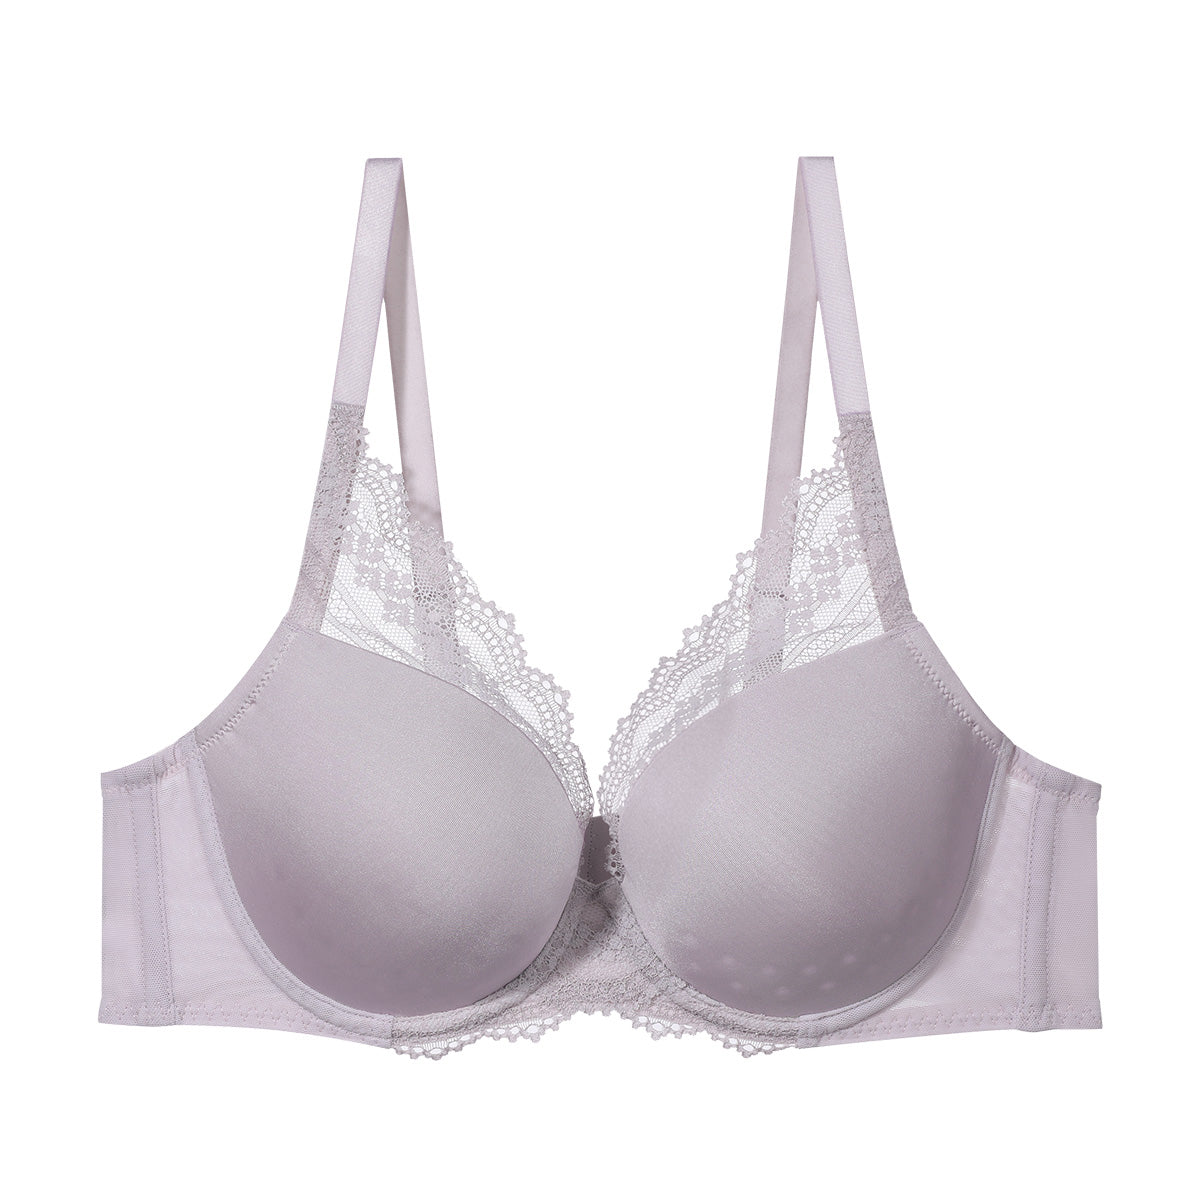 Aimer Breathable Lightly Lined Bra